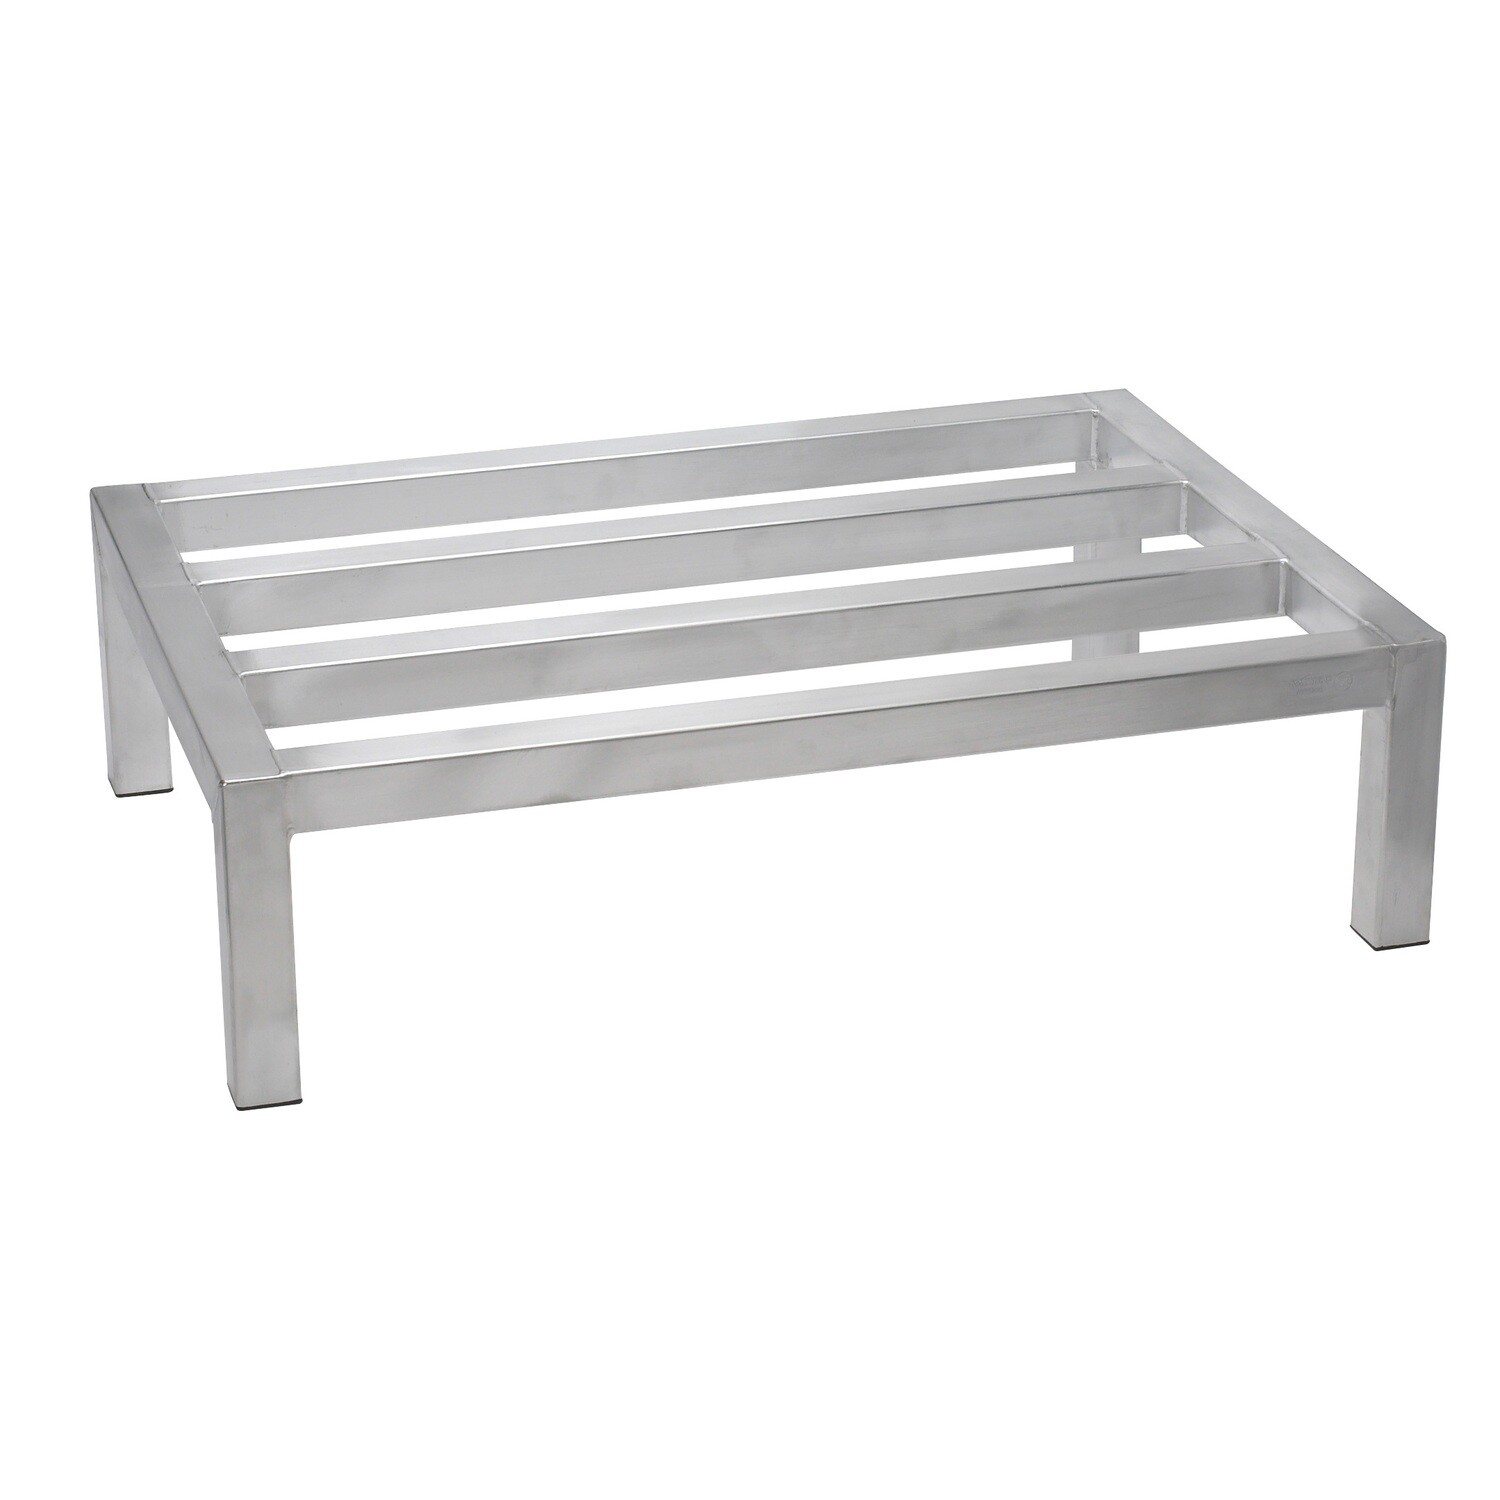 Winco ASDR-1436 Aluminum Dunnage Rack, Tubular, Welded Structure, Holds up to 900 lbs.,14" x 36" x 8"